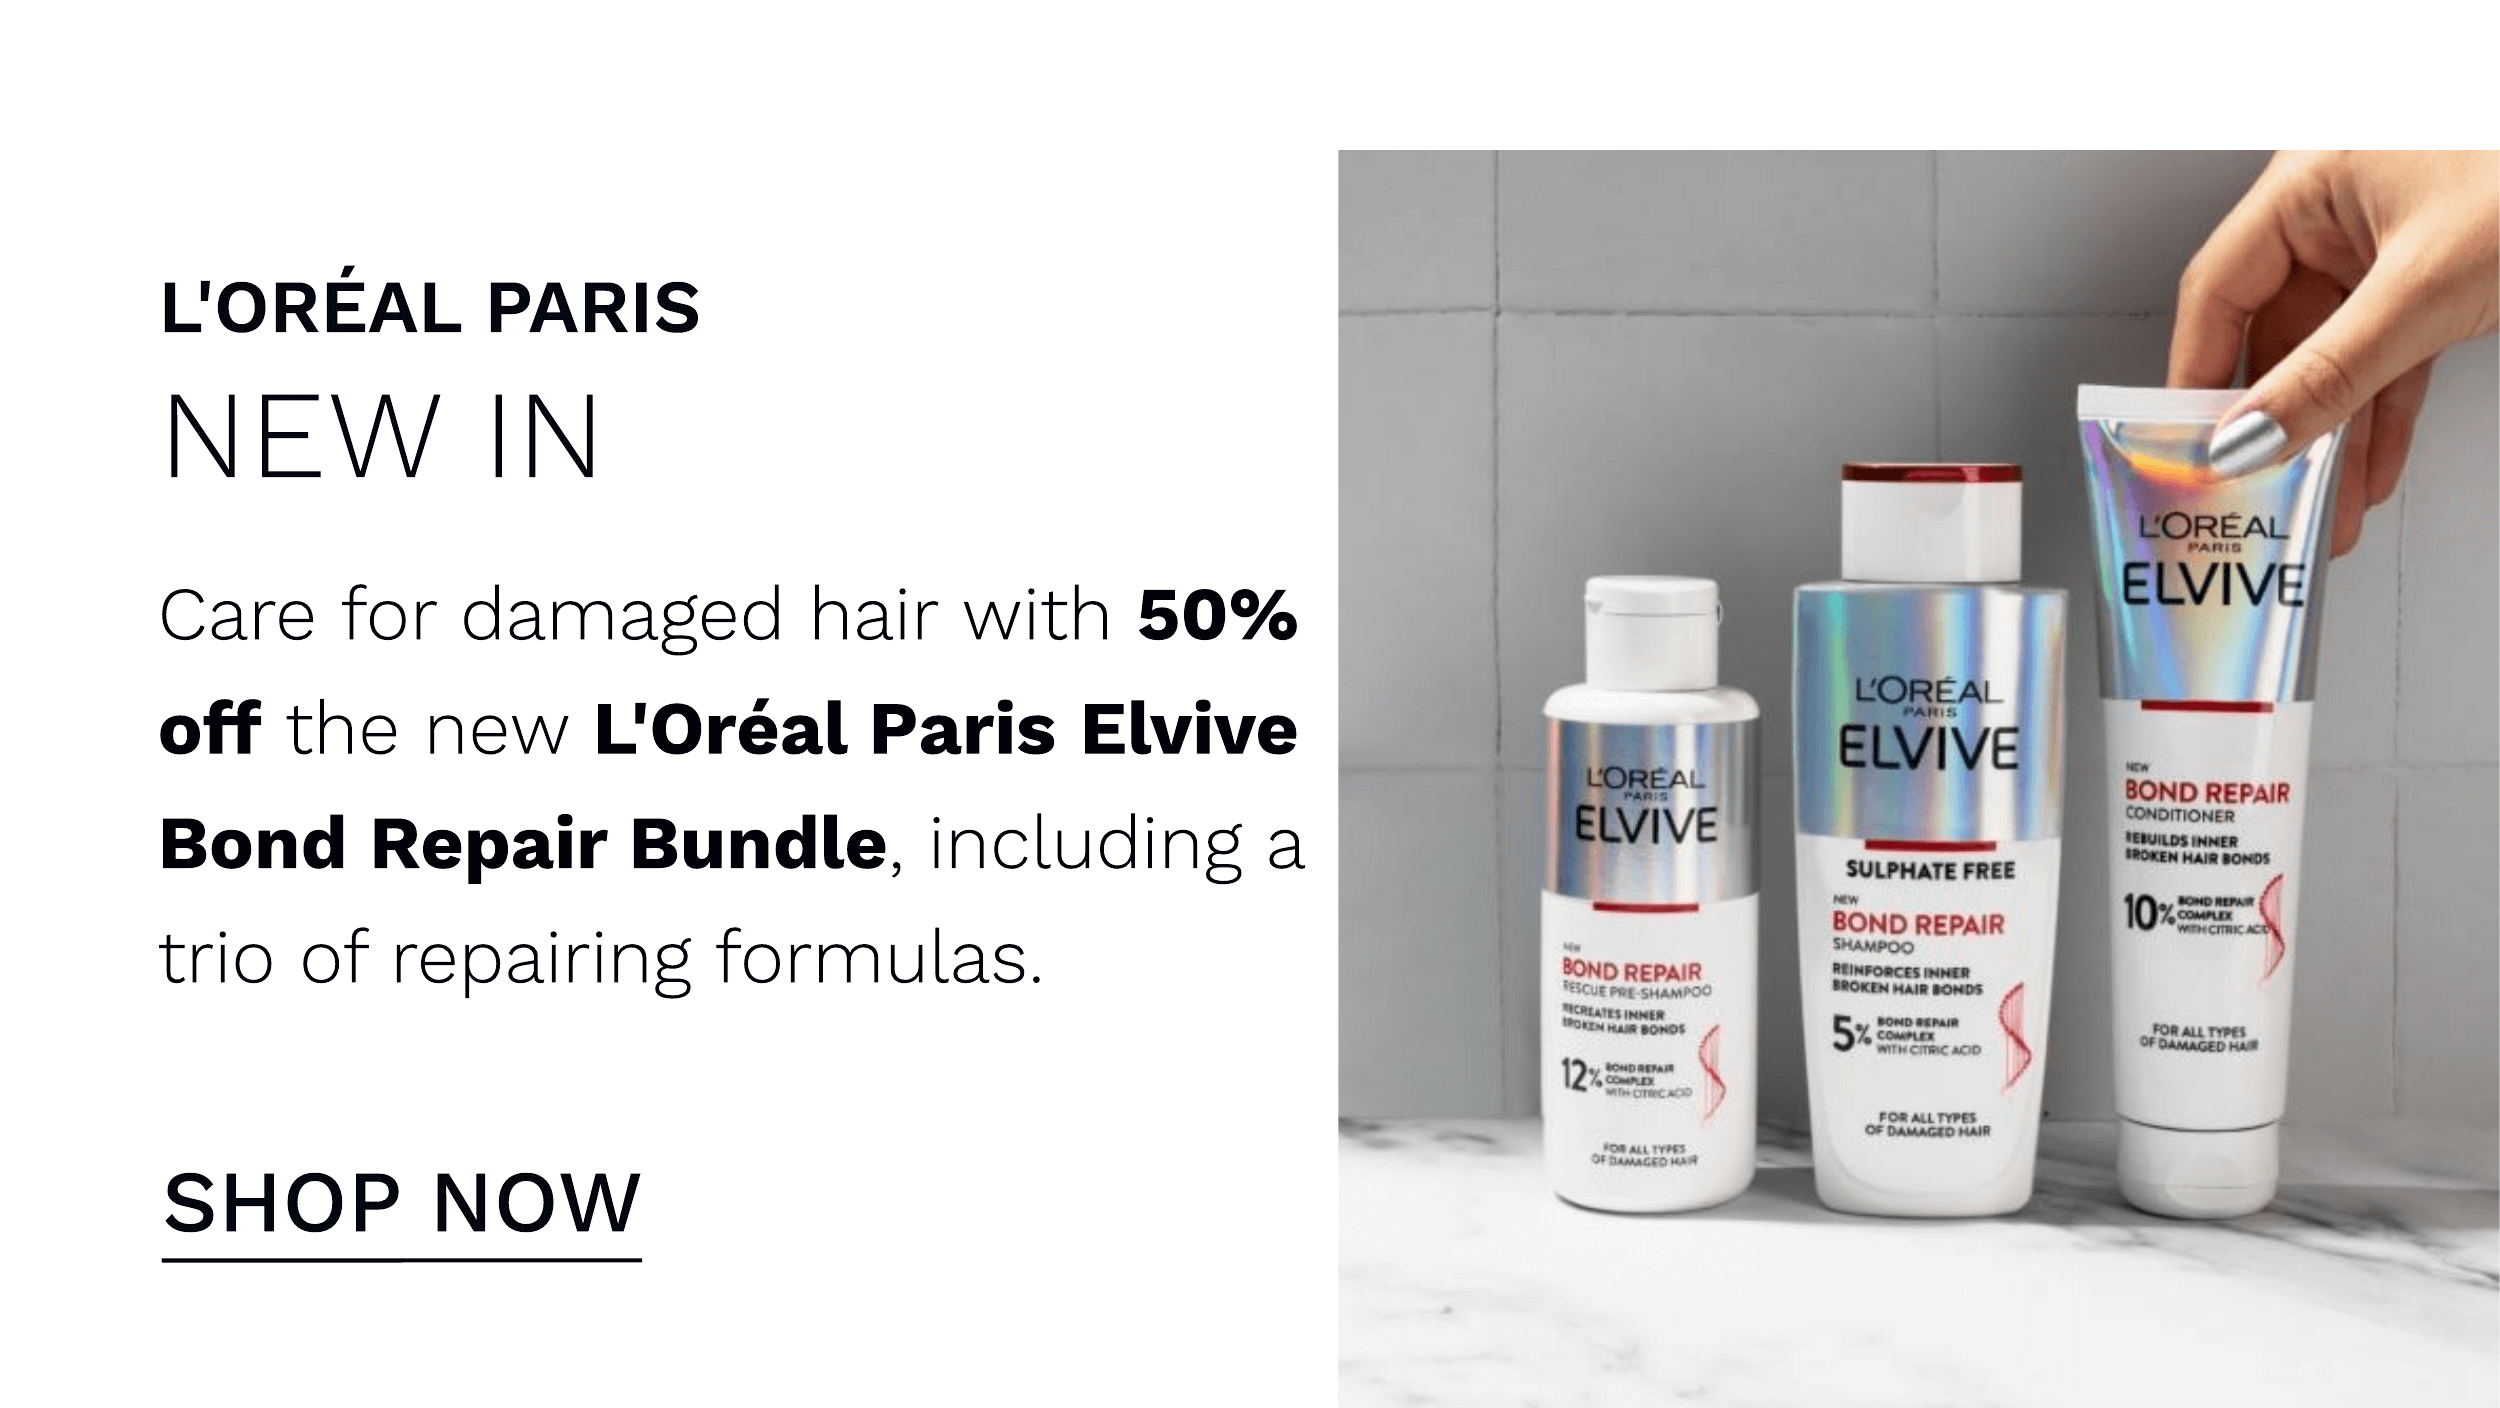 L'OREAL PARIS NEW IN Care for damaged hair with 50% off the new L'Oreal Paris Elvive Bond Repair Bundle, including a trio of repairing formulas. . TRLATEs IR 02N s BONDS sowommm sx WITH CITRC ACD 5 s, FOR ALL TYPES OF DAMAGED MAIR $Om it 1vPEs OF BAMAGHD 1 SHOP NOW 